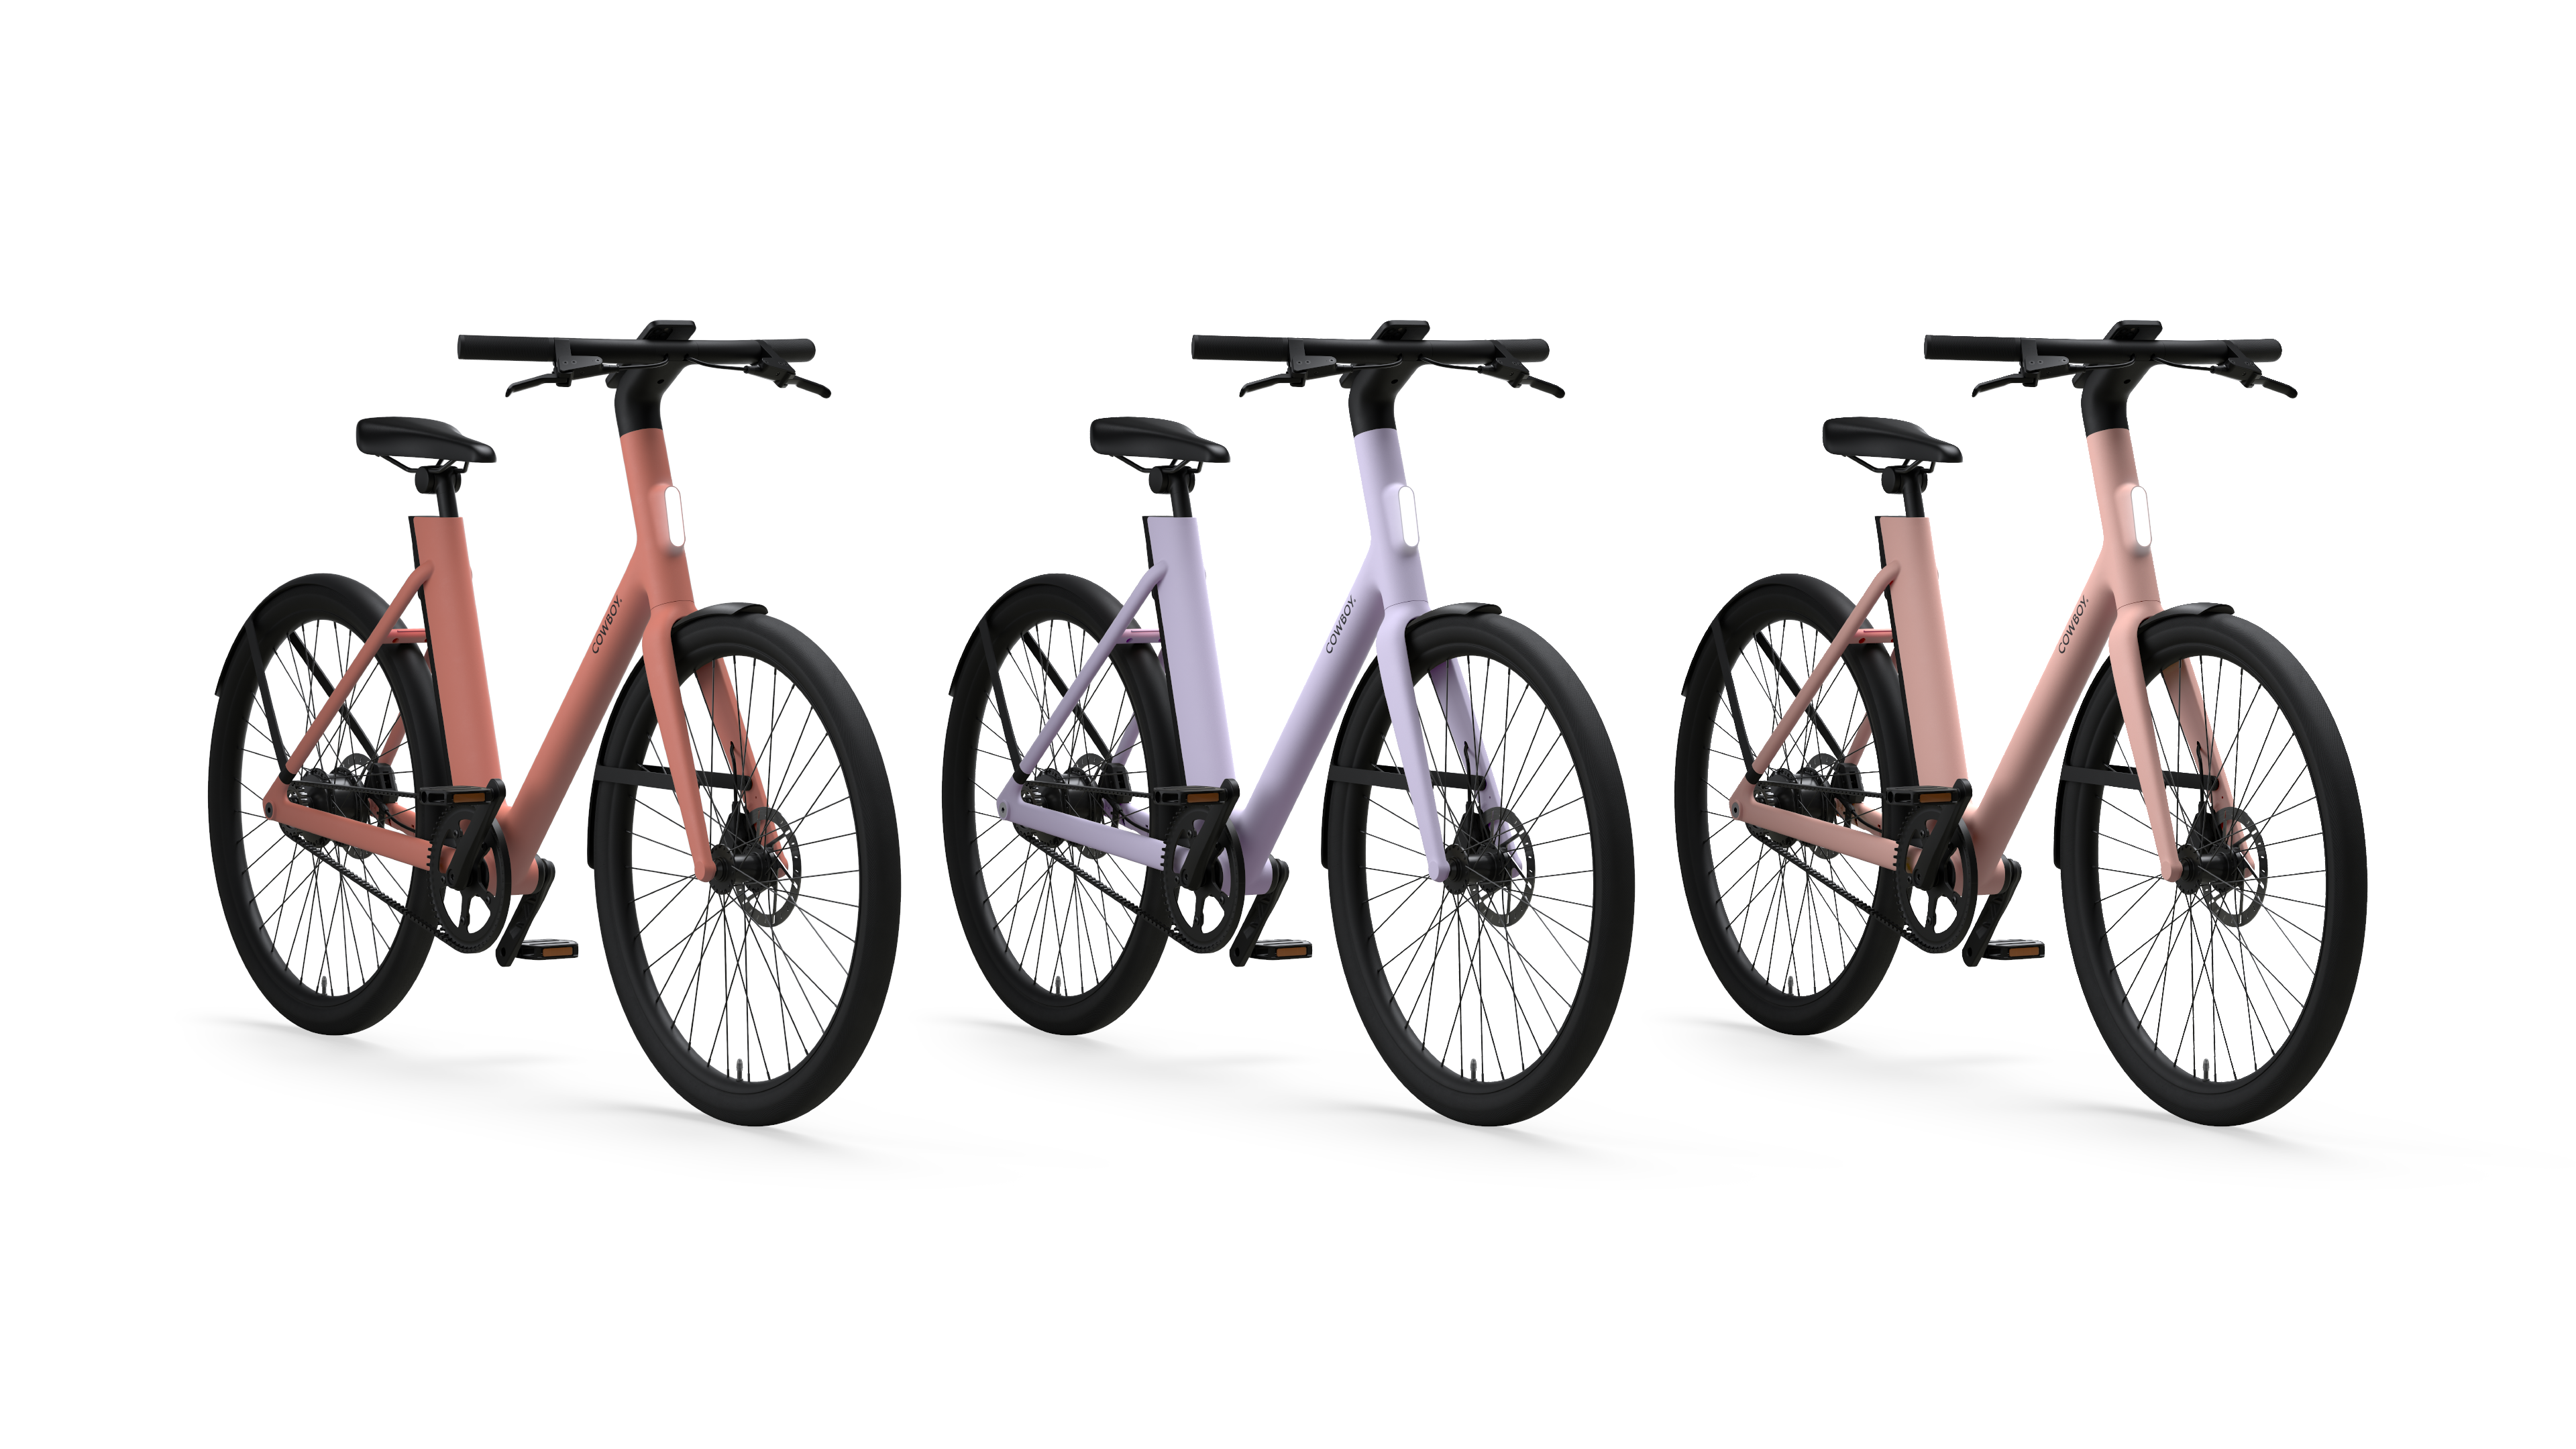 The new colors of the Cowboy 4 ST e-bike